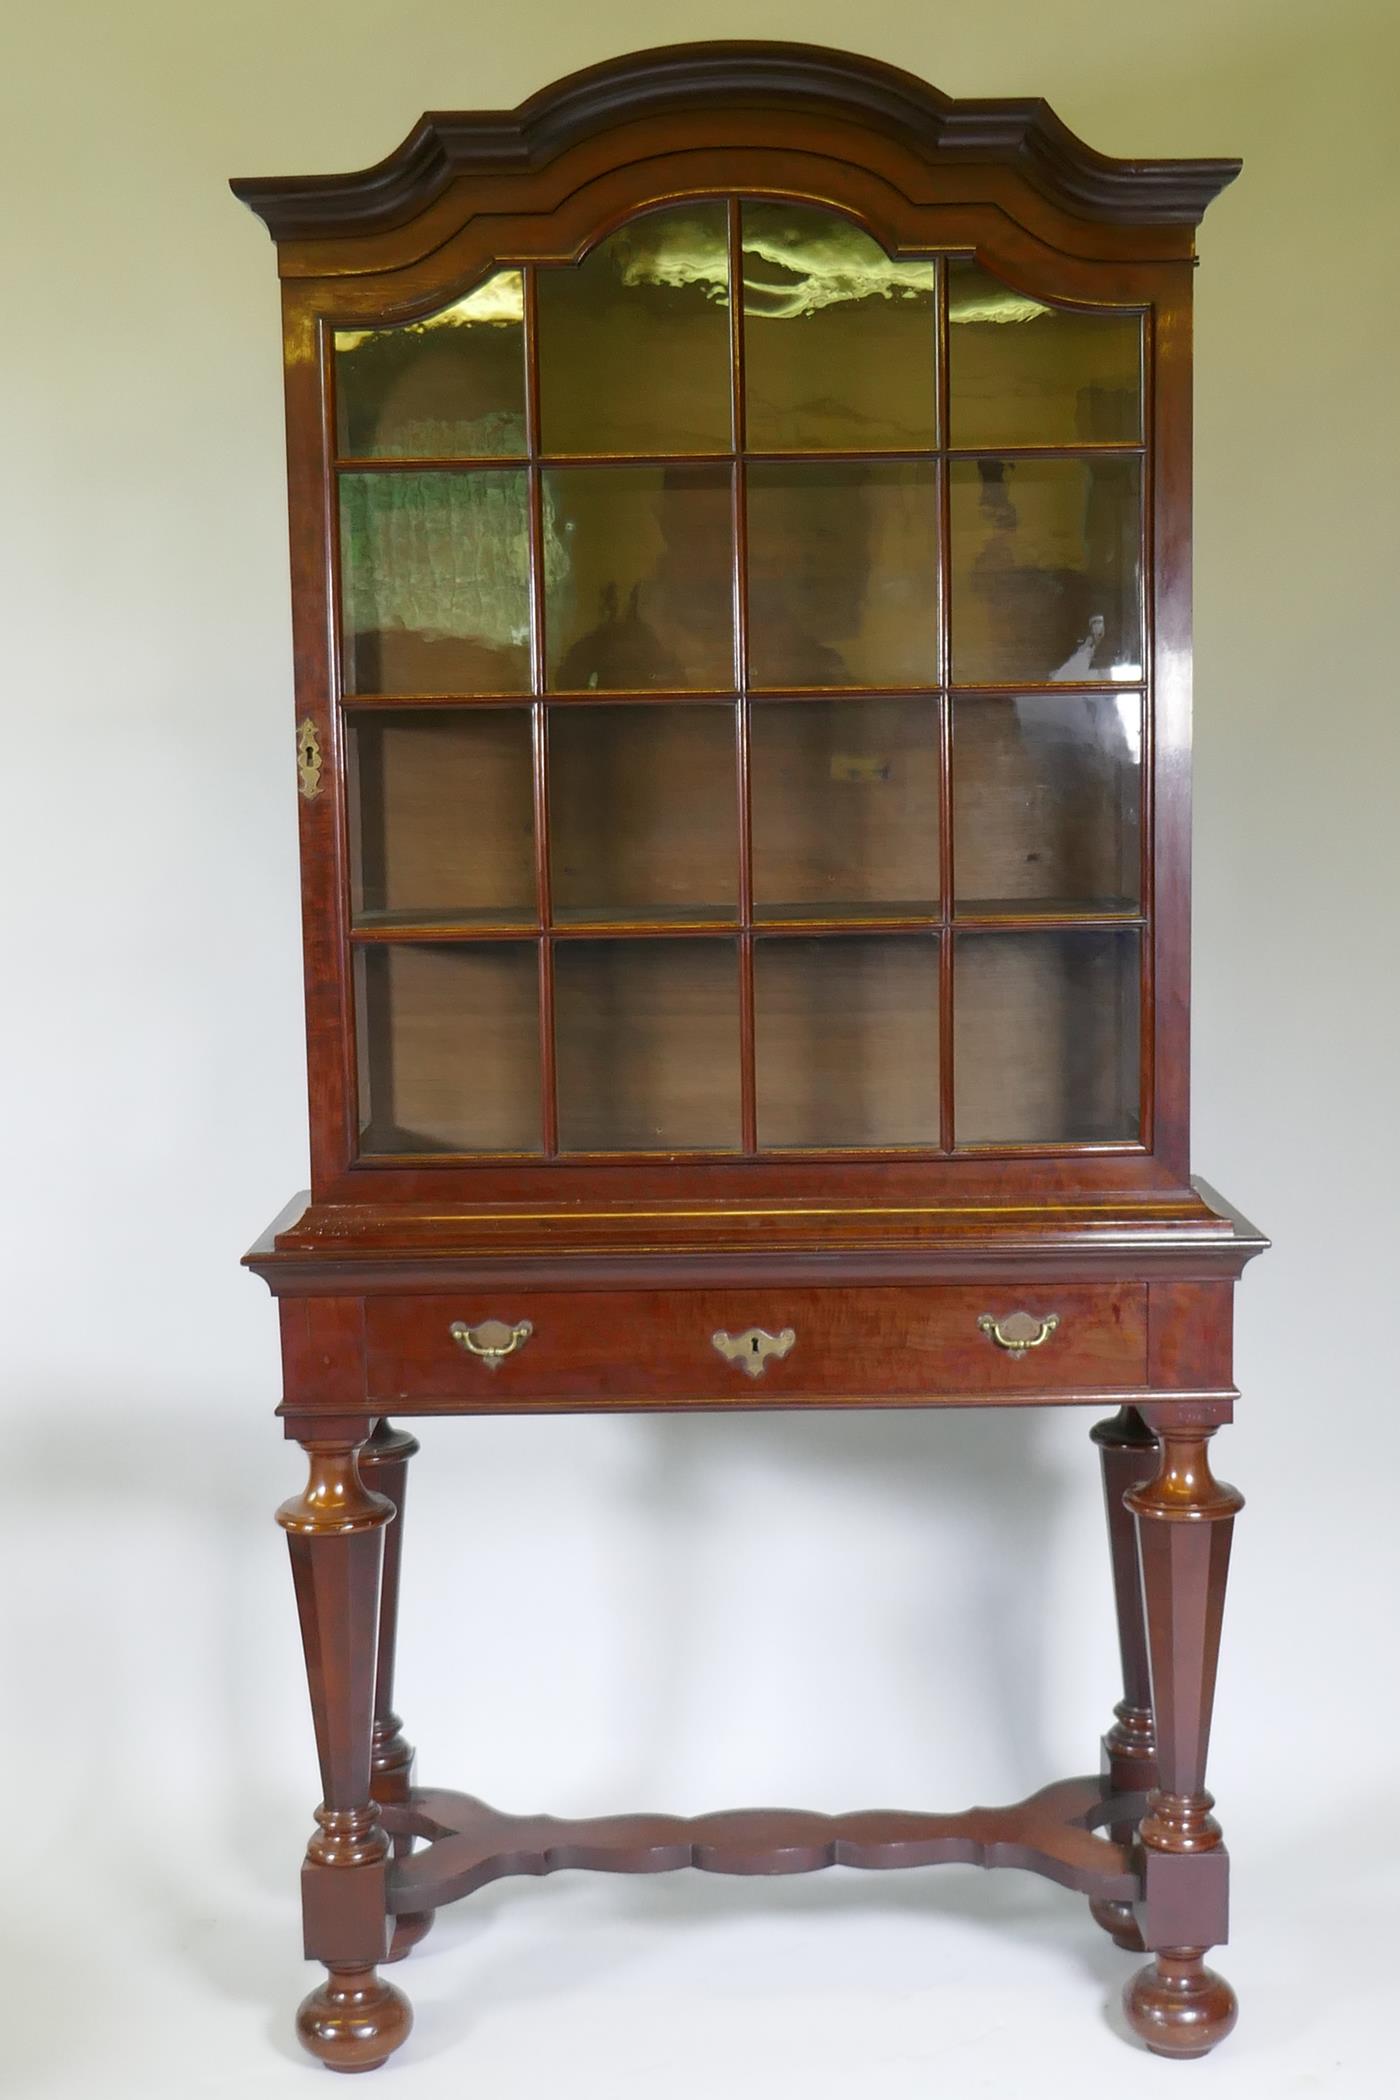 A C19th Dutch mahogany dome topped glazed display cabinet, with single door on a base with one - Image 2 of 8